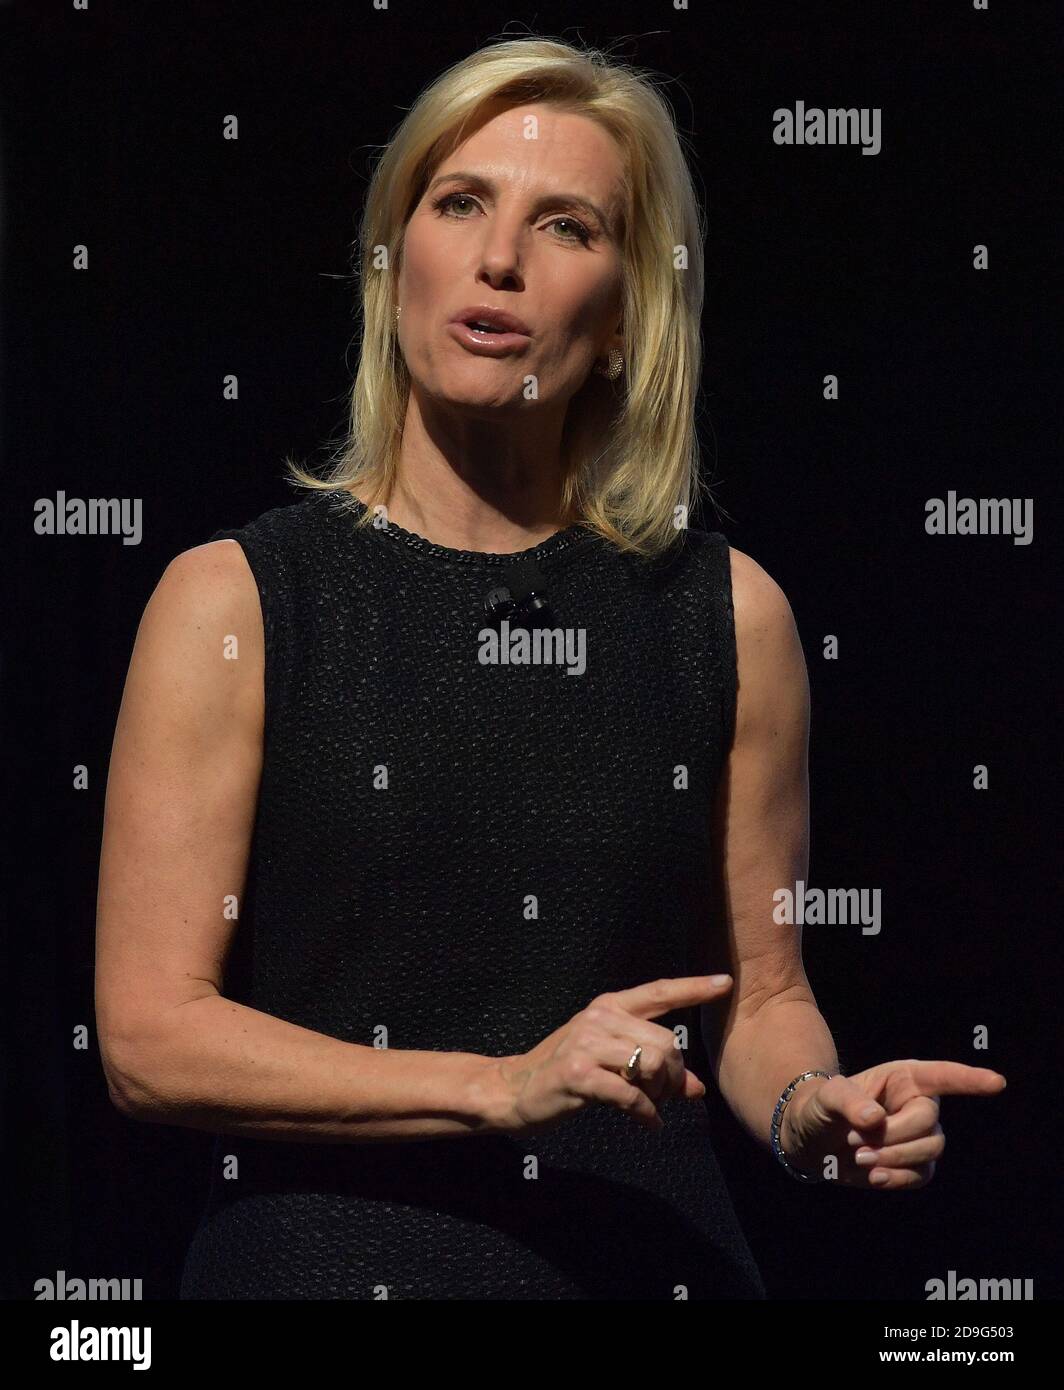 WEST PALM BEACH, FL - DECEMBER 21: Laura Ingraham Speaks at the 2019 Turning Point USA Student Action Summit - Day 3 at the Palm Beach County Convention Center on December 21, 2019 in West Palm Beach, Florida.  People:  Laura Ingraham Credit: Hoo-me / MediaPunch Stock Photo